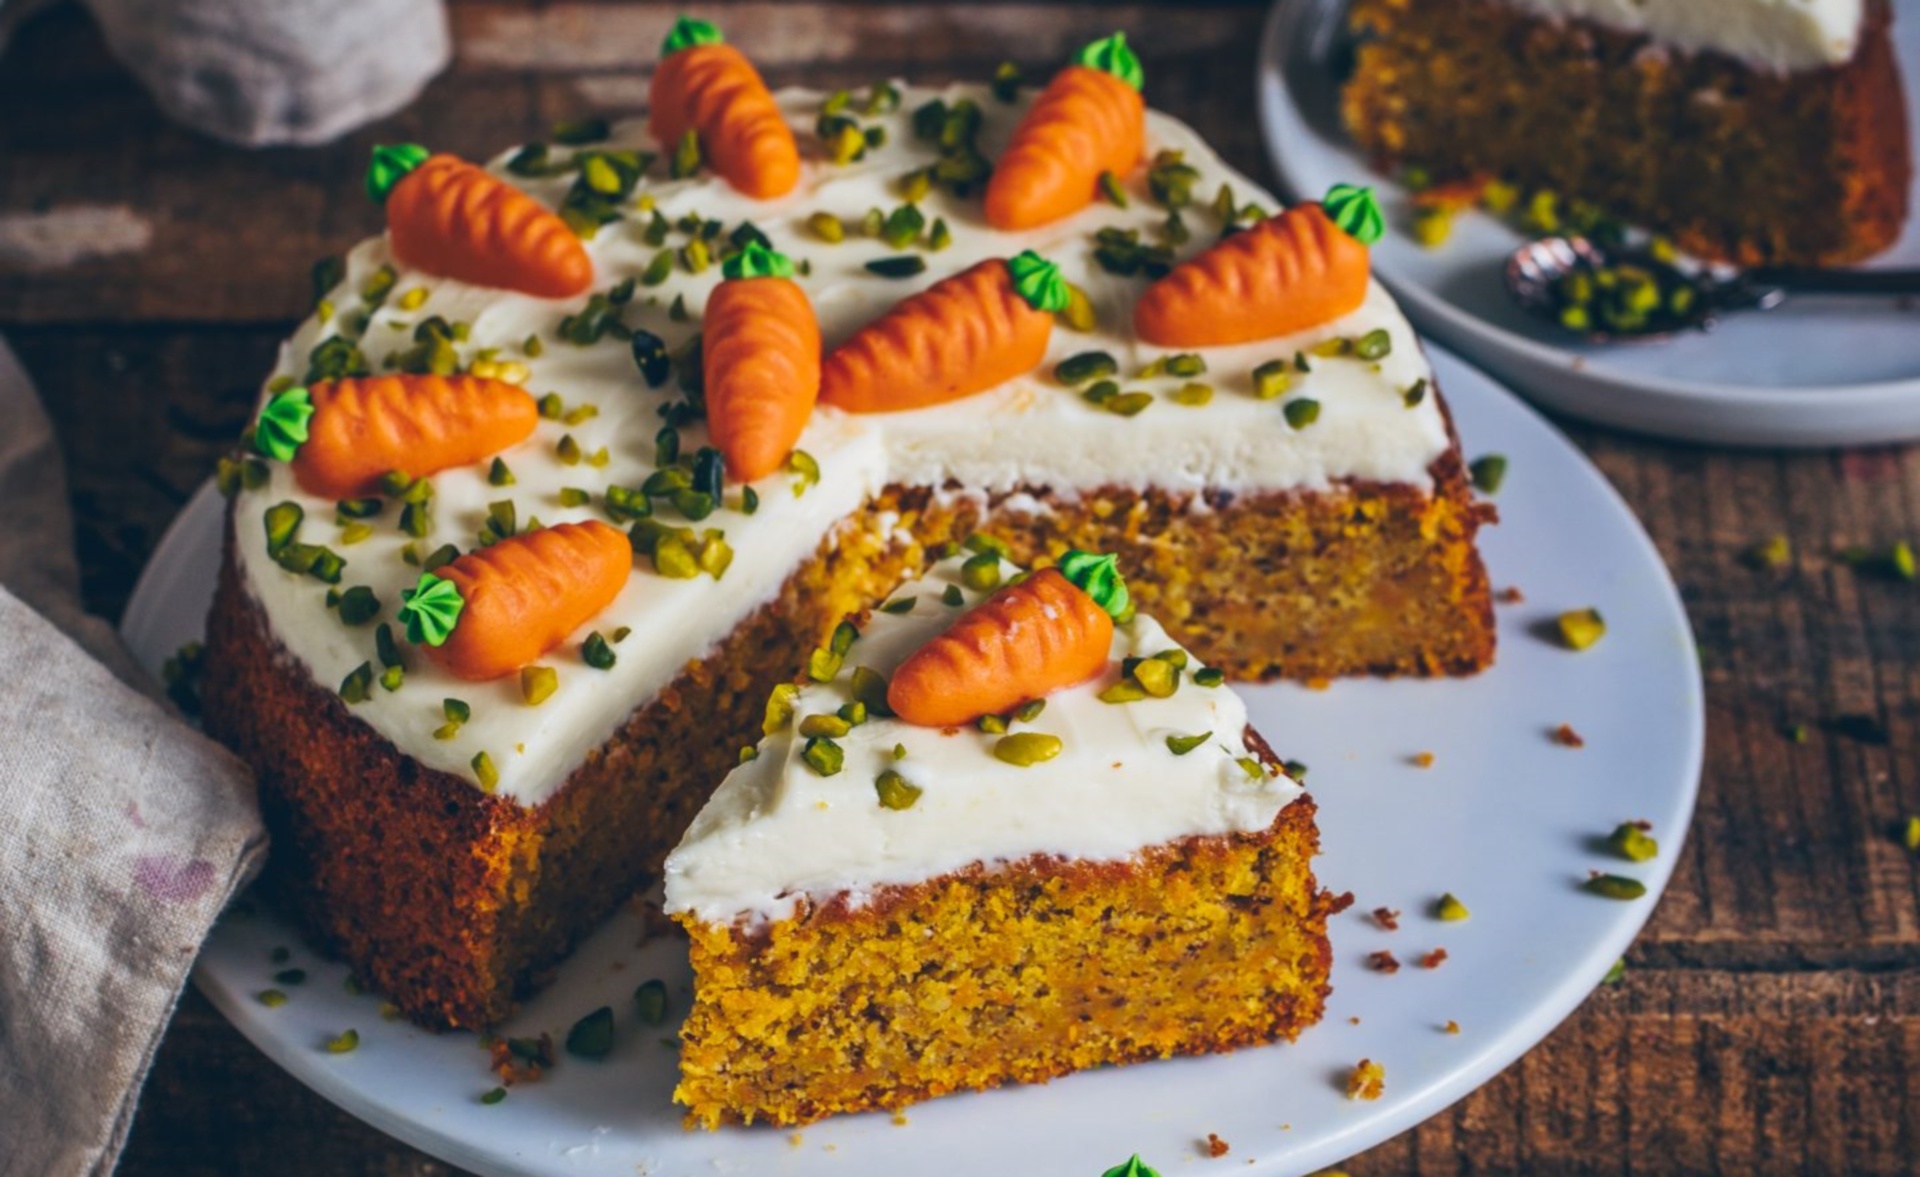 Cake Carrot Pastry 1920x1177